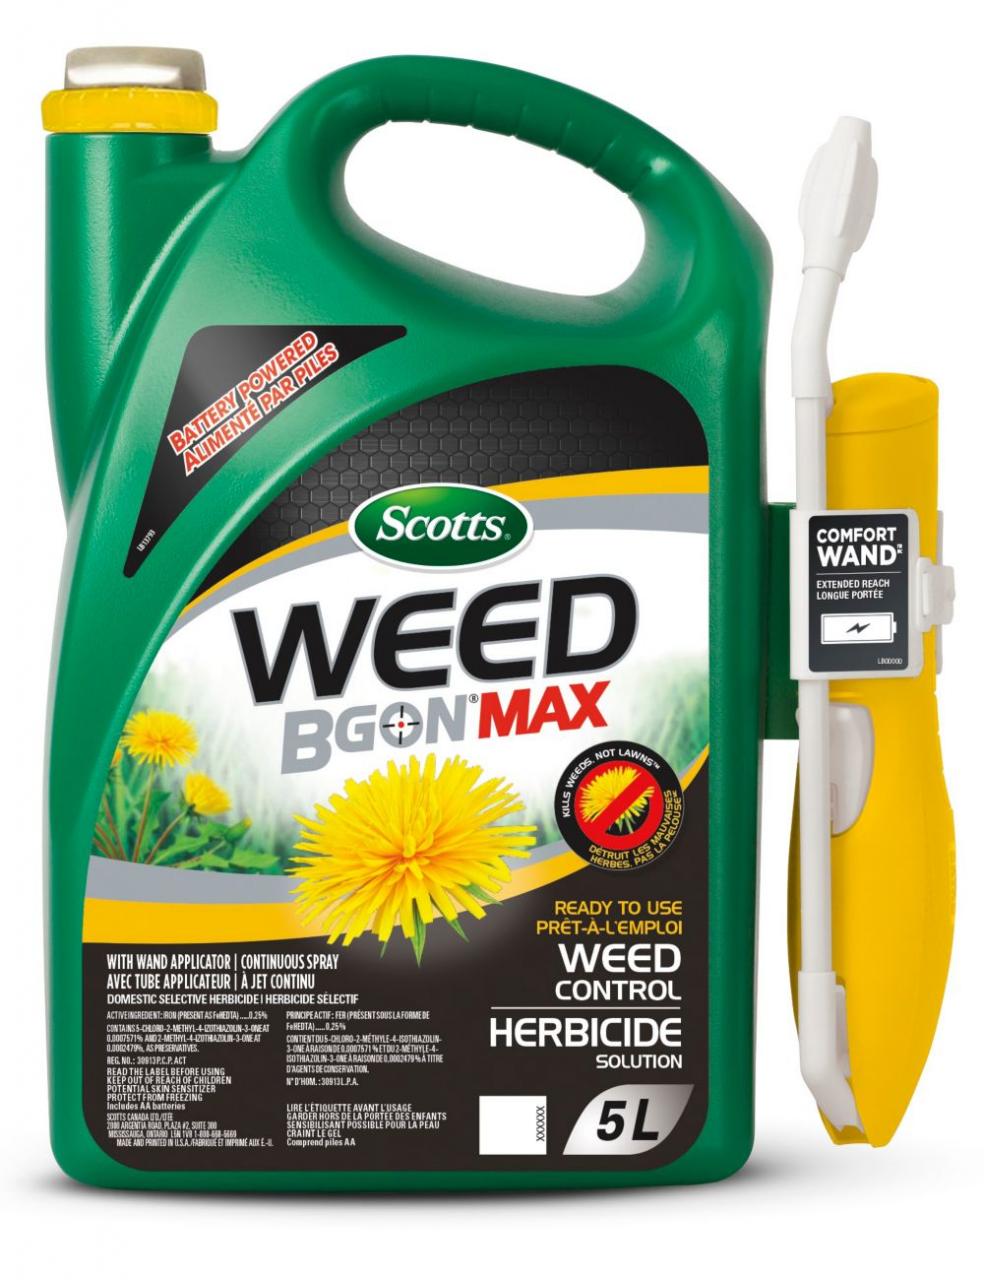 Scott Weed B Gon MAX Ready-to-Use 5L Weed Control with Wand Applicator |  The Home Depot Canada